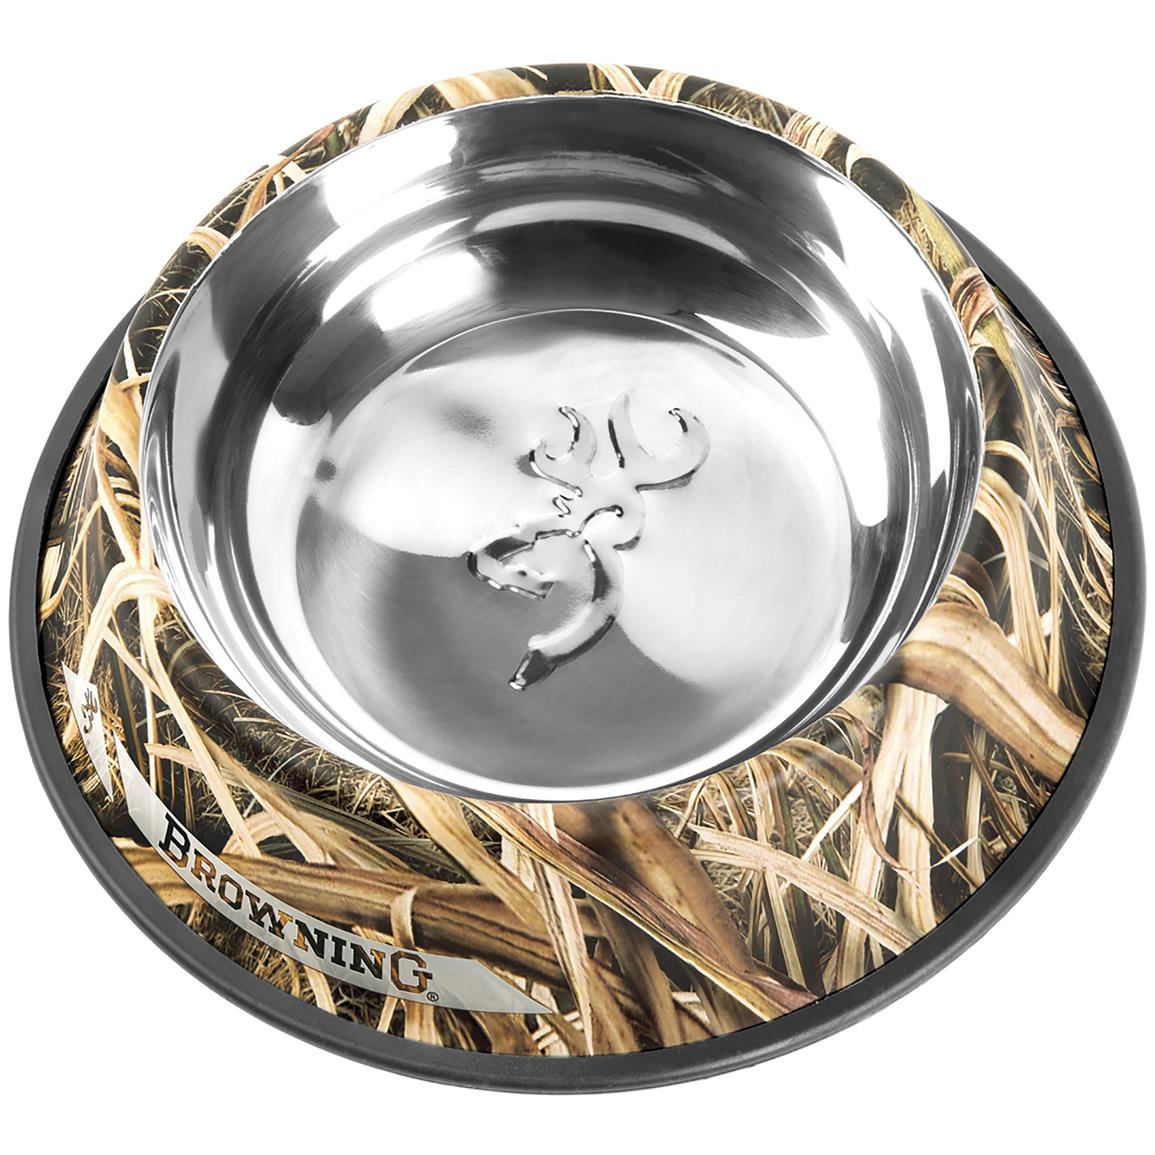 Browning Stainless Steel Pet Dish 666221, Pet Accessories at Sportsman's Guide